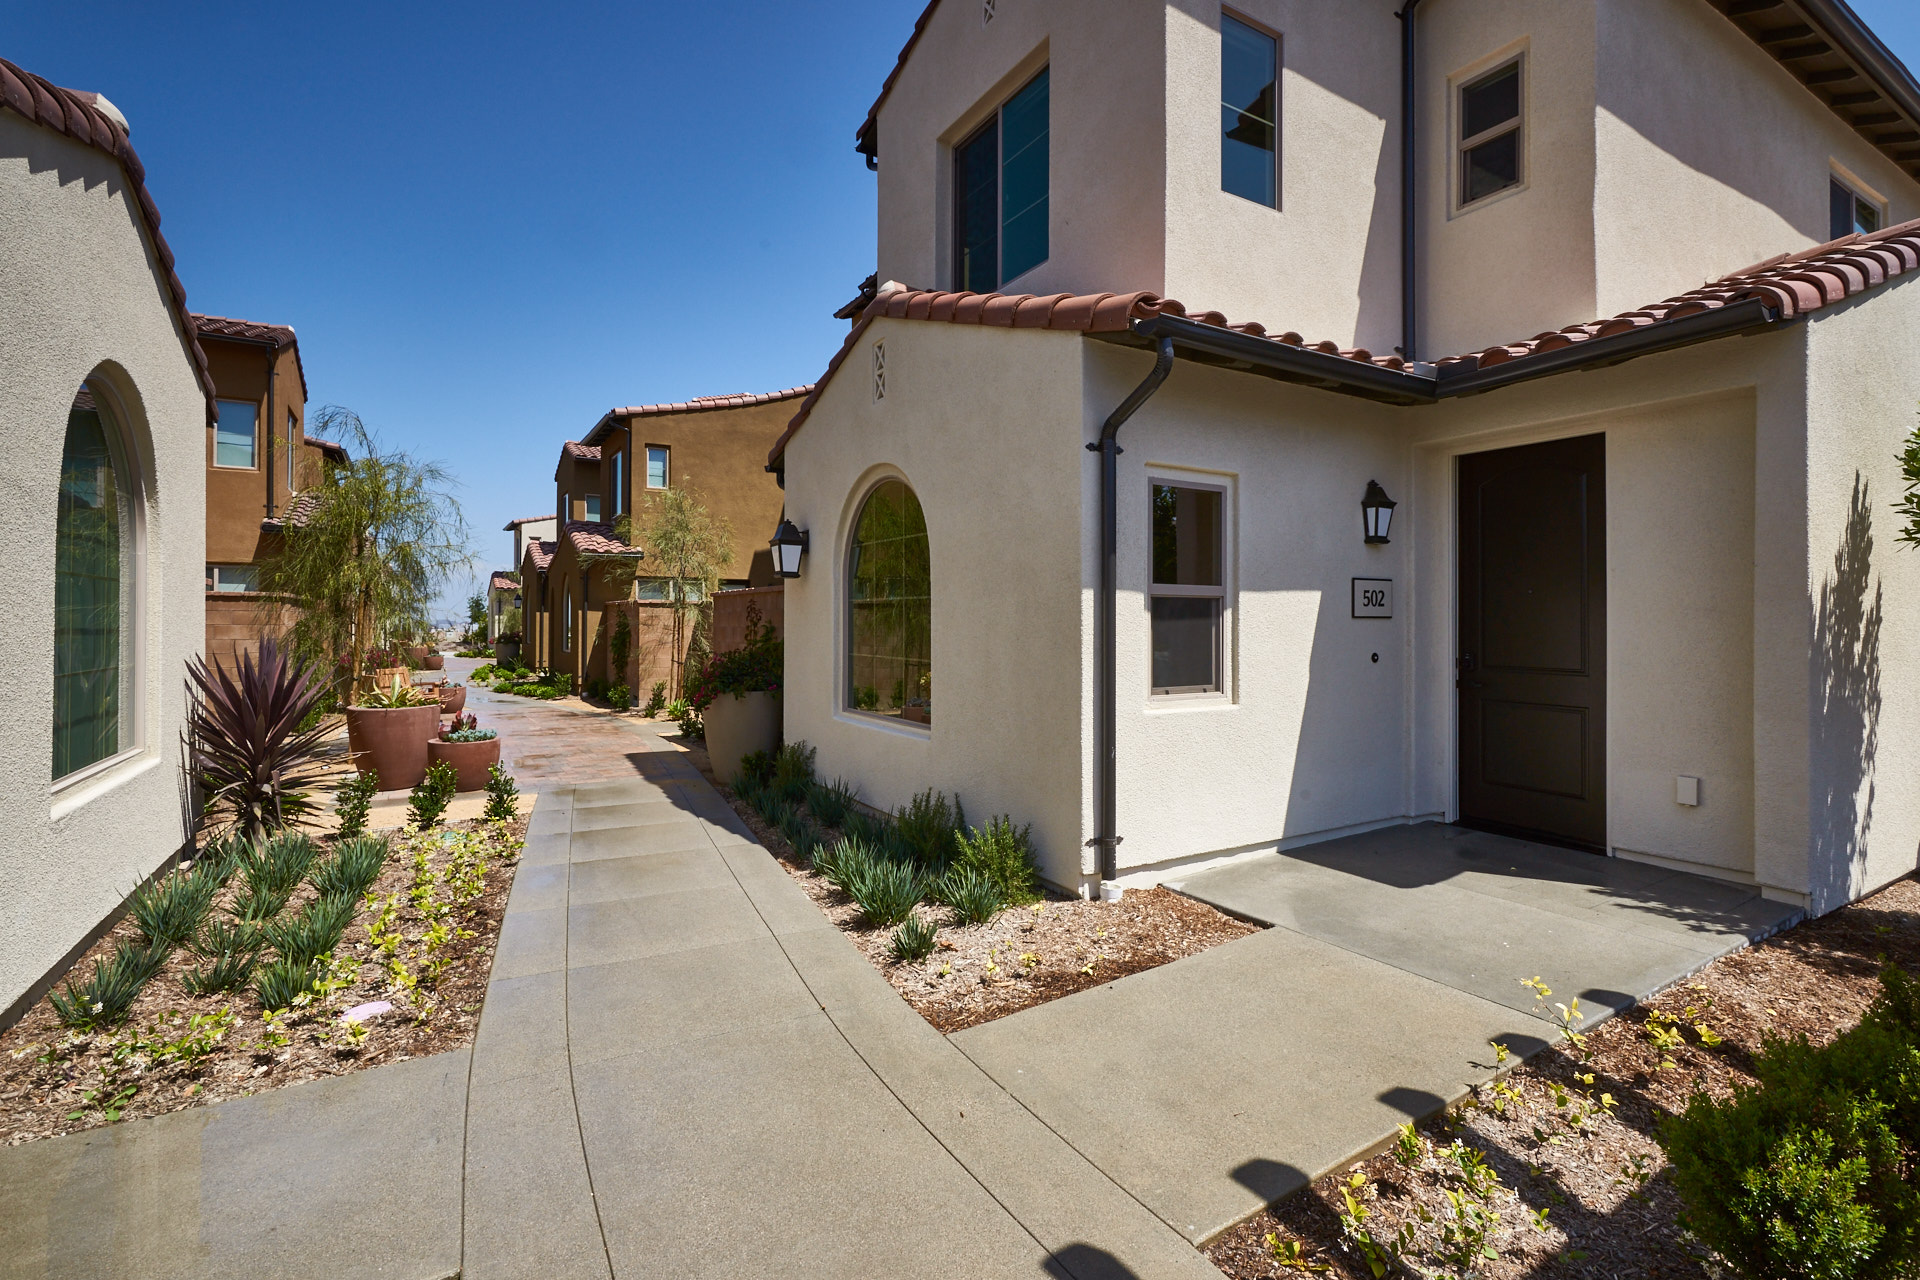 Alturas Townhomes